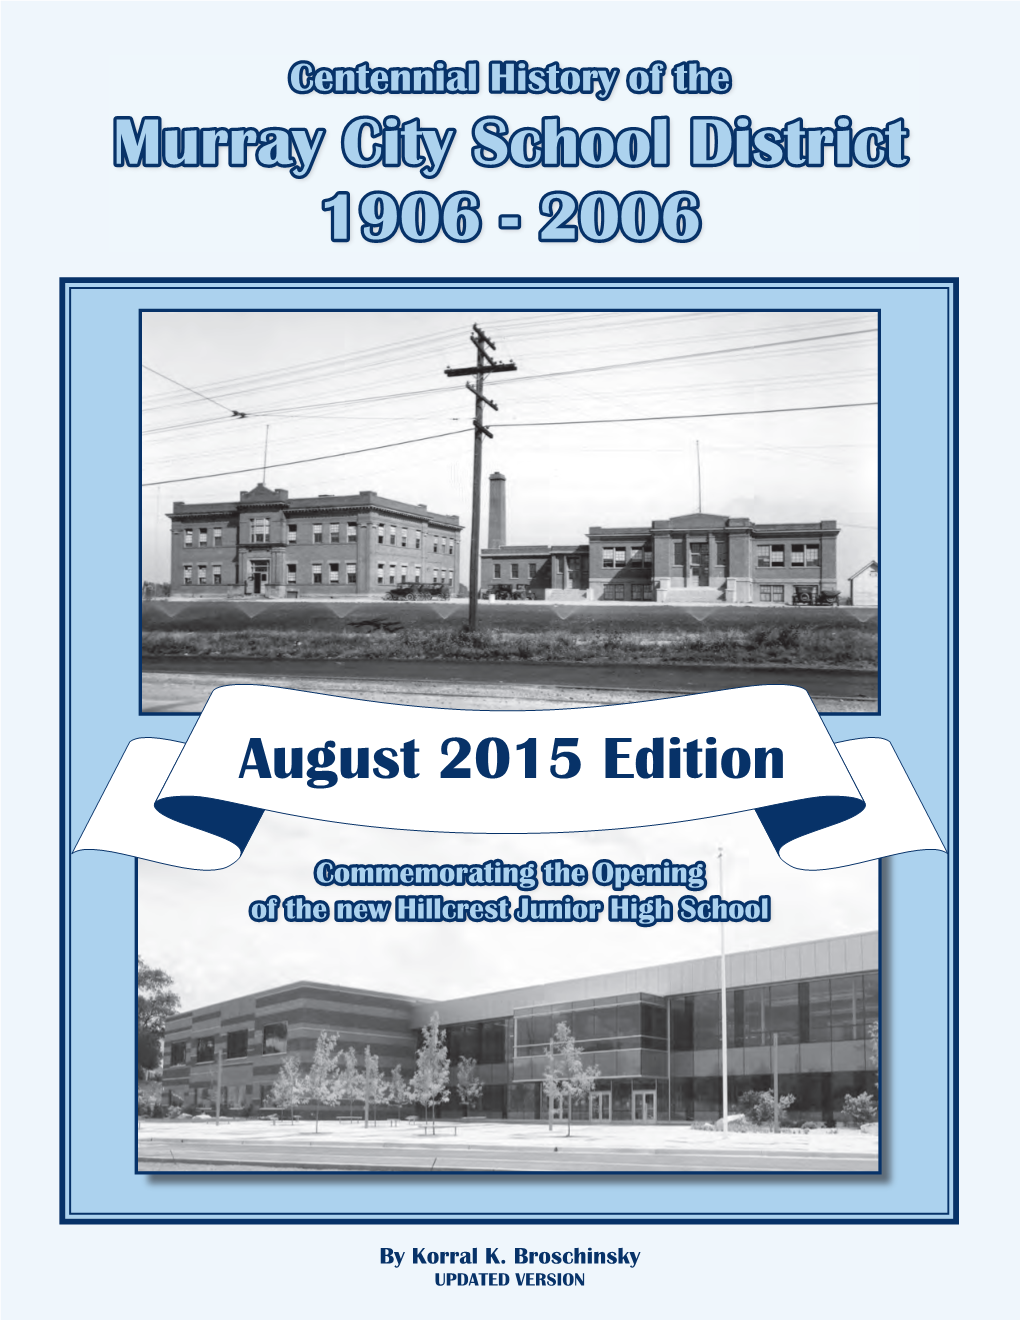 Centennial History of the Murray City School District 1906 - 2006